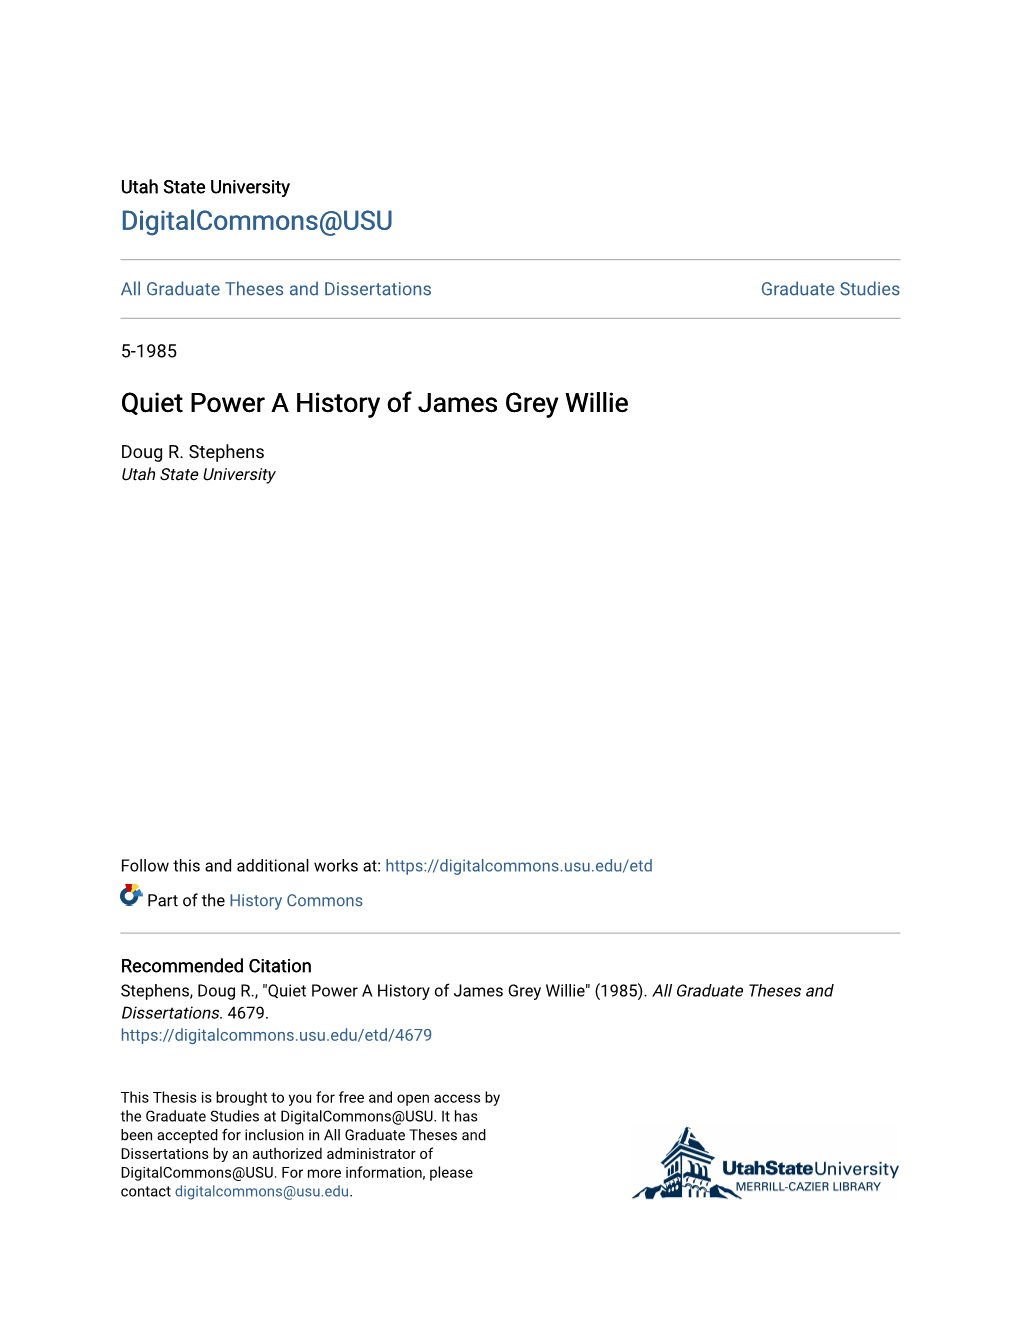 Quiet Power a History of James Grey Willie